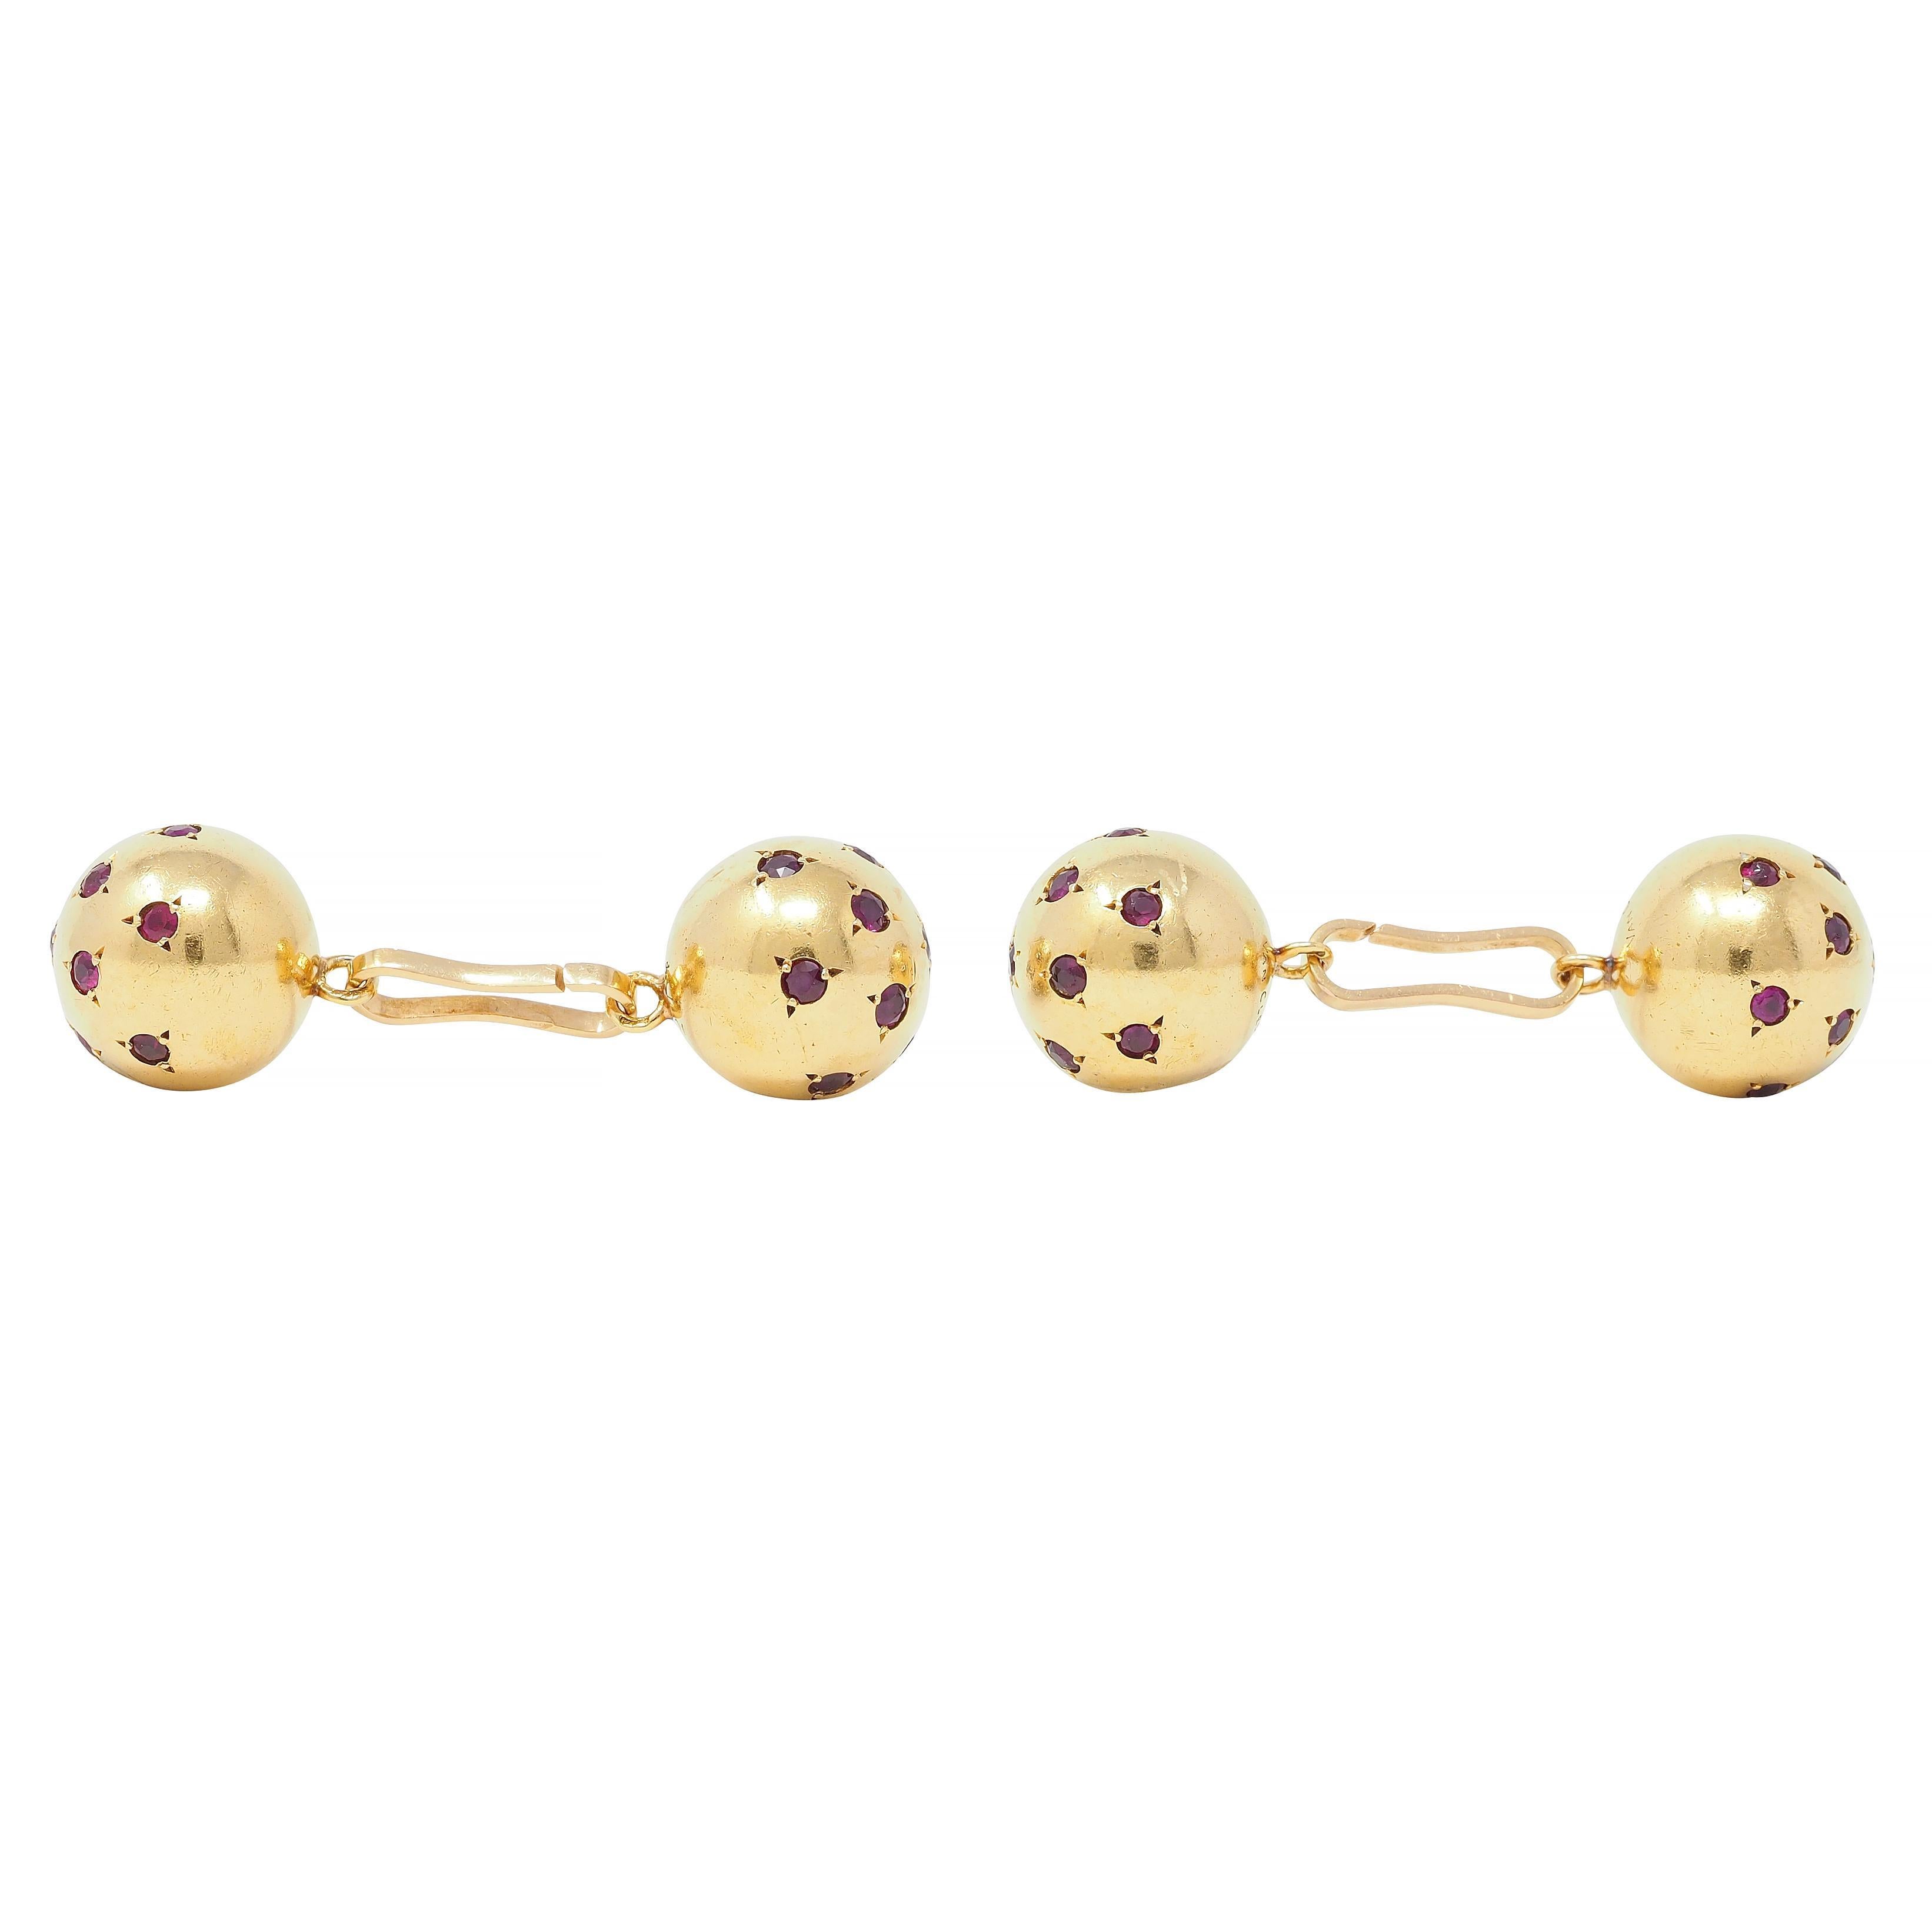 Designed as link-style cufflinks terminating with gold spheres
Flush set throughout with round cut rubies 
Weighing approximately 2.20 carats total
Transparent medium purplish red in color 
Tested as 18 karat gold
Numbered and fully signed with